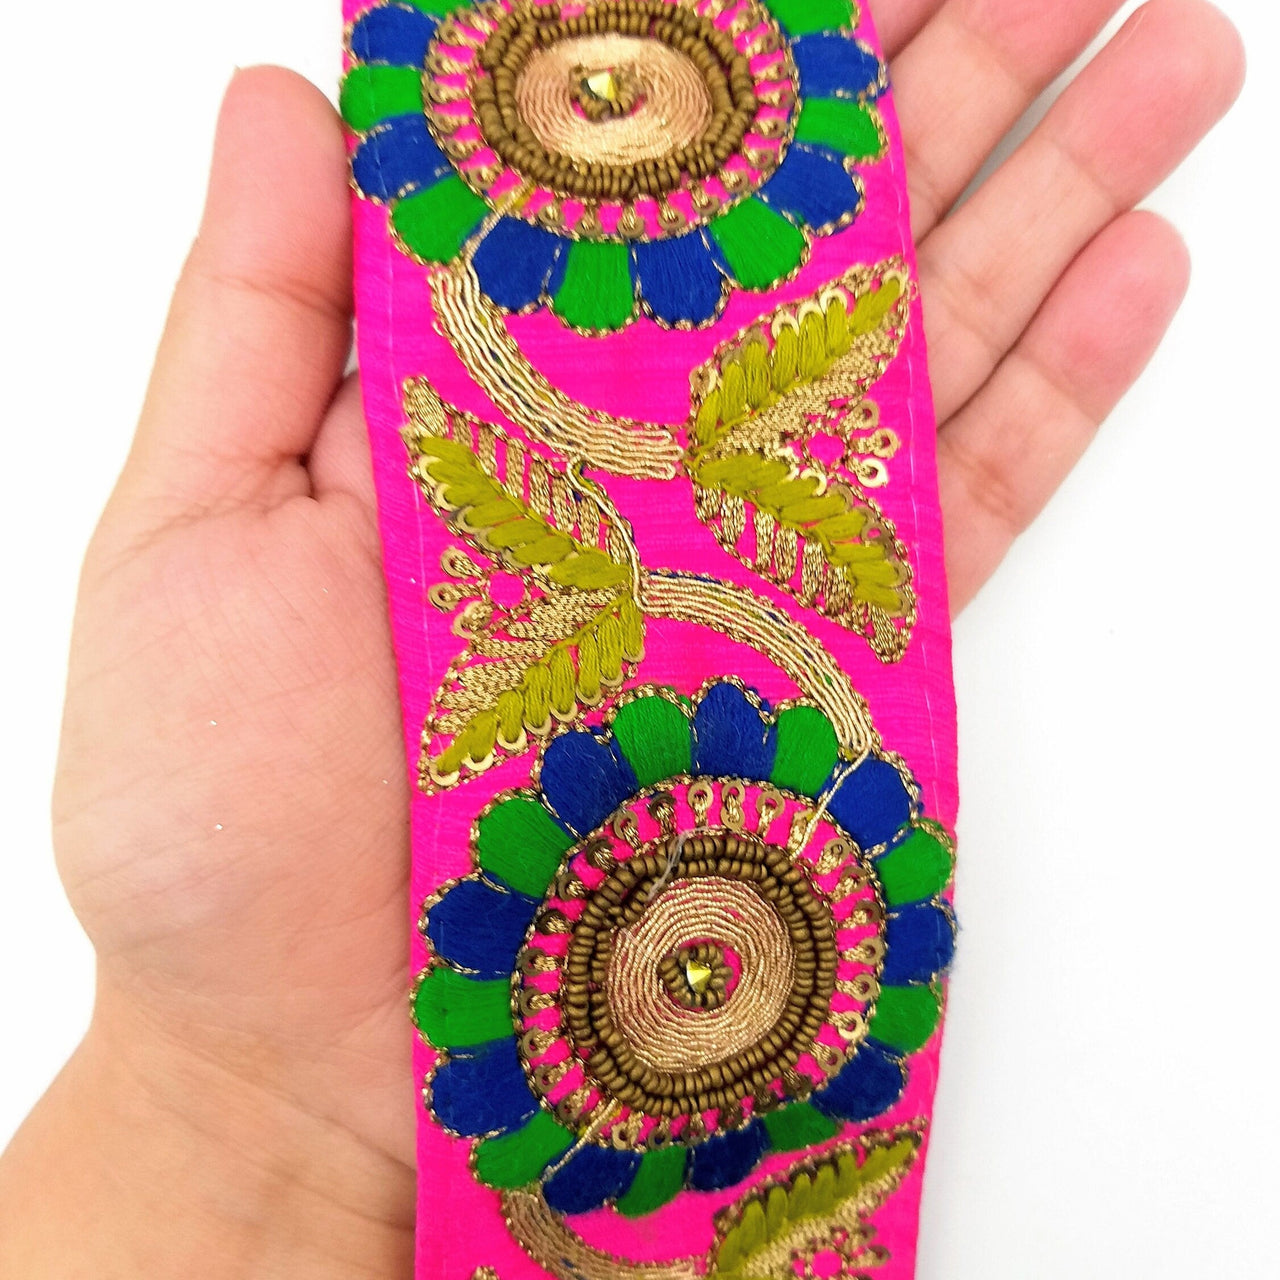 Fuchsia Art Silk Lace Trim, Floral Embroidery in Green and Blue, Hand Embroidered Border with Antique Gold beads and Gold Sequins